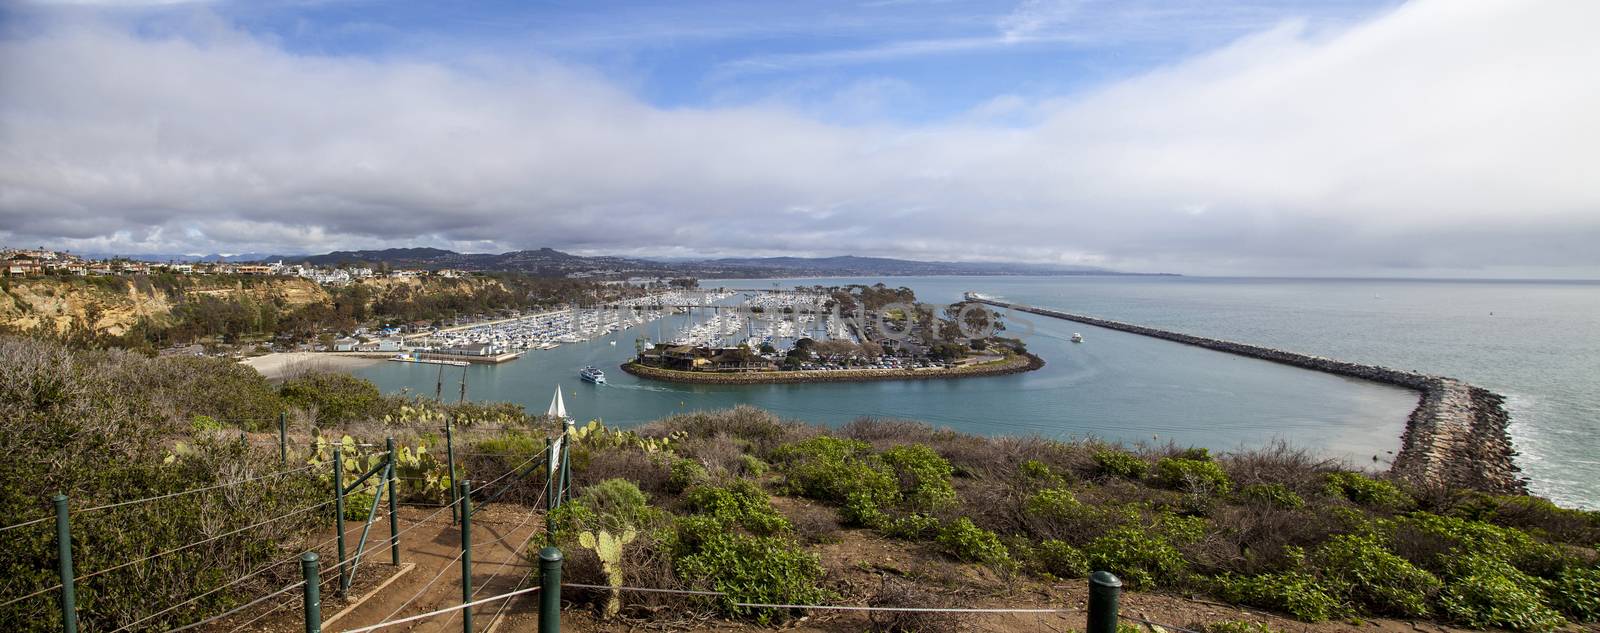 Dana Point Harbor from the hiking path above in Southern California, USA on a sunny day